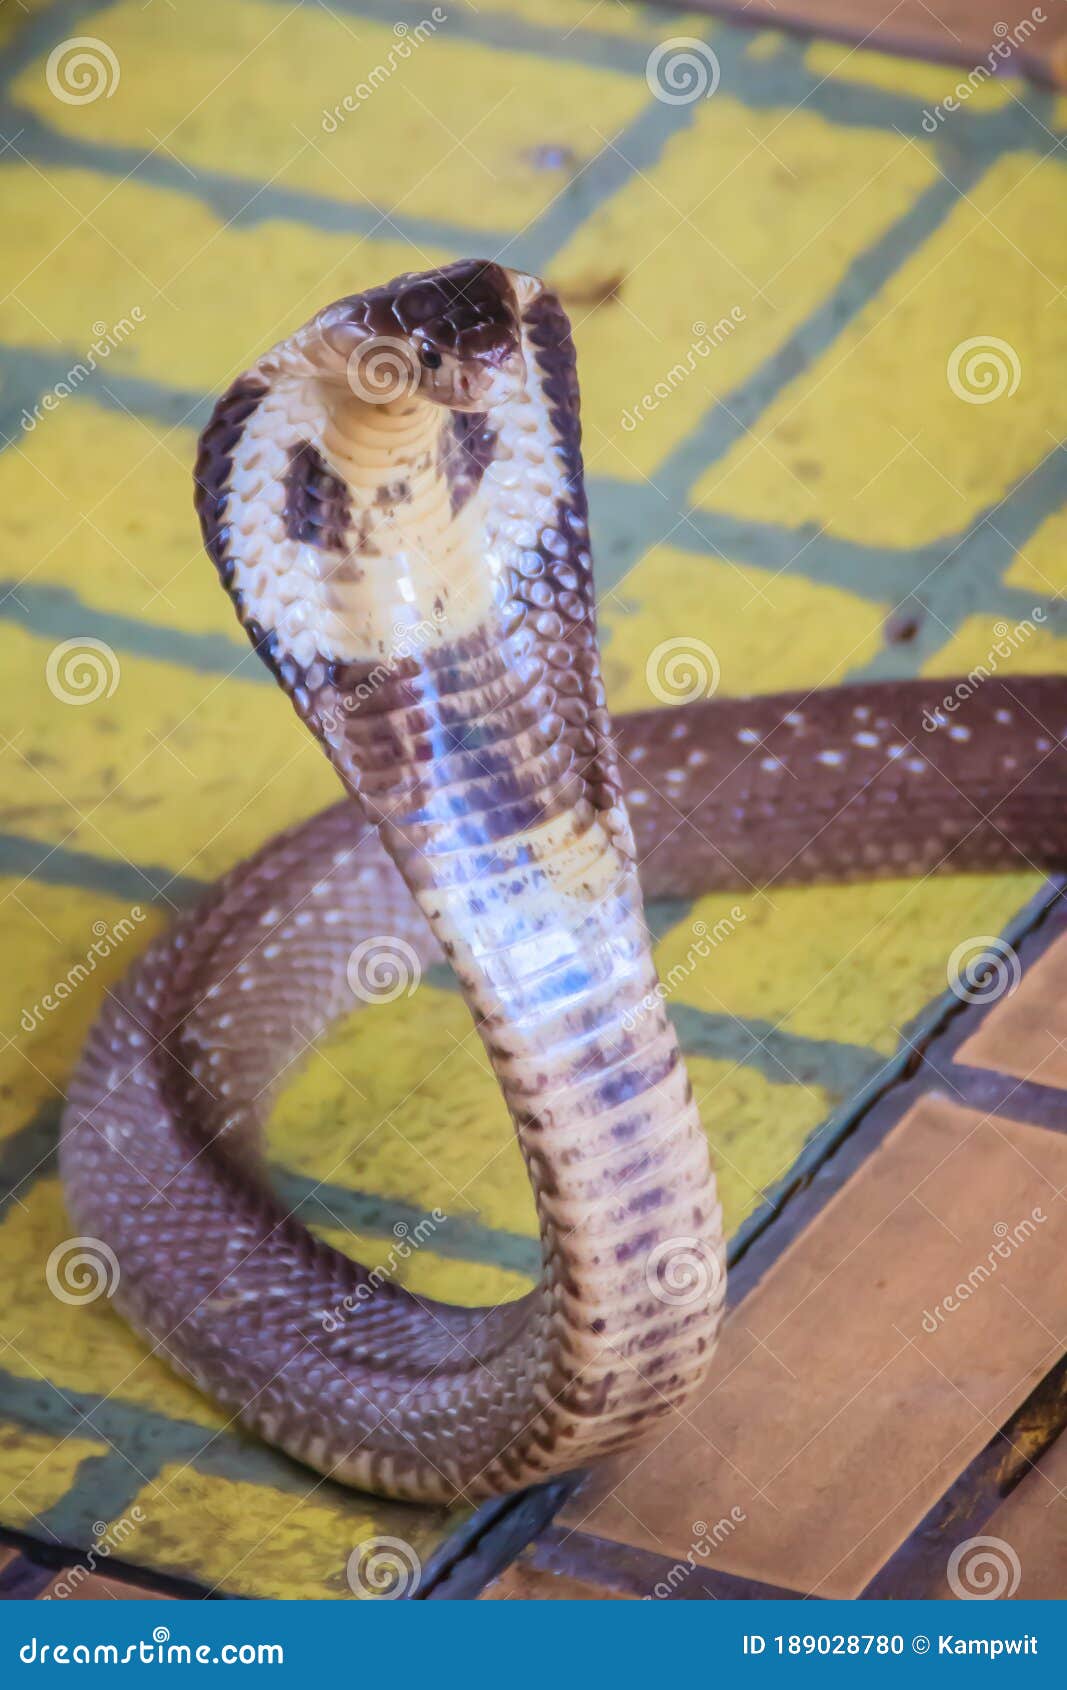 a cobra hooding and growling on the floor. the monocled cobra (naja kaouthia), also called monocellate cobra, is a deadly venomous